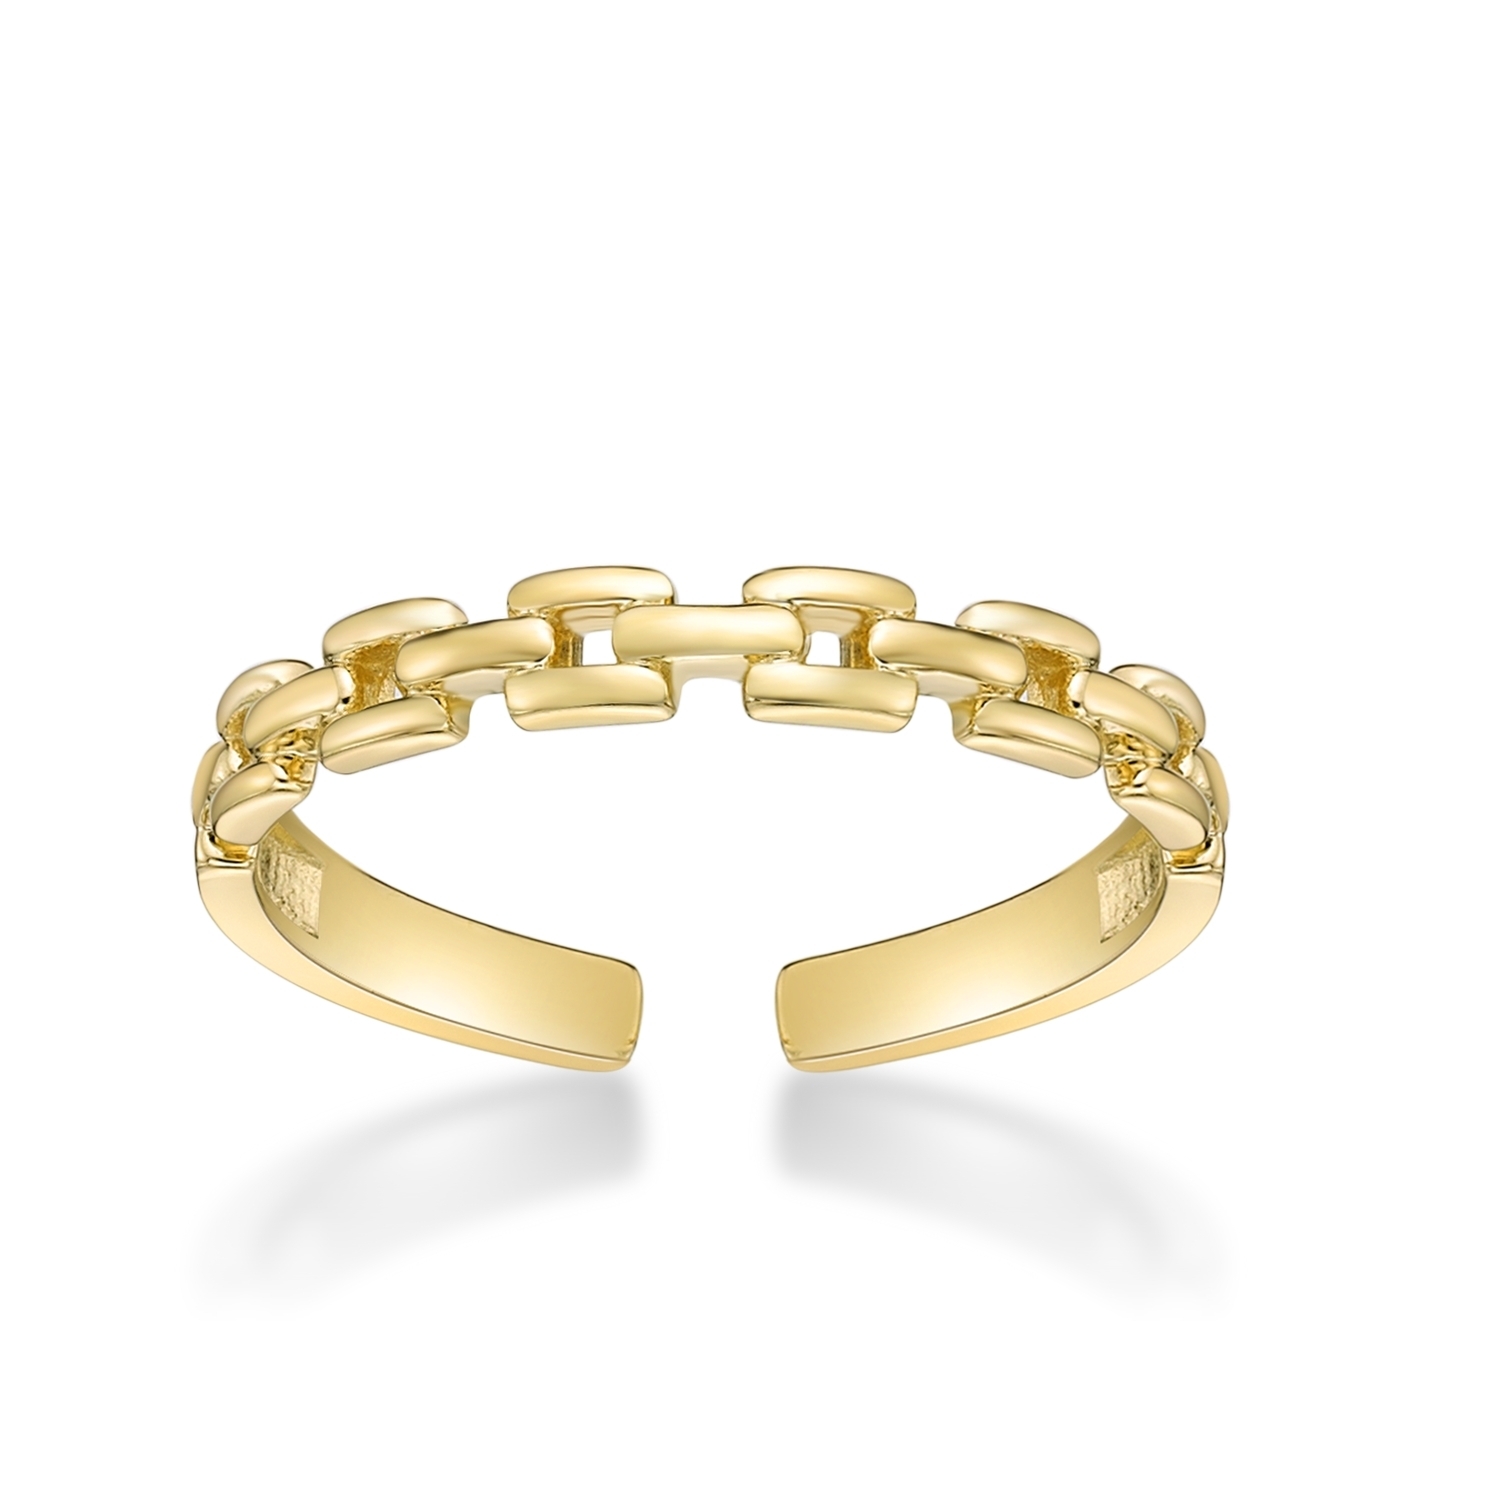 50931-toe-ring-default-collection-yellow-gold-50931.jpg